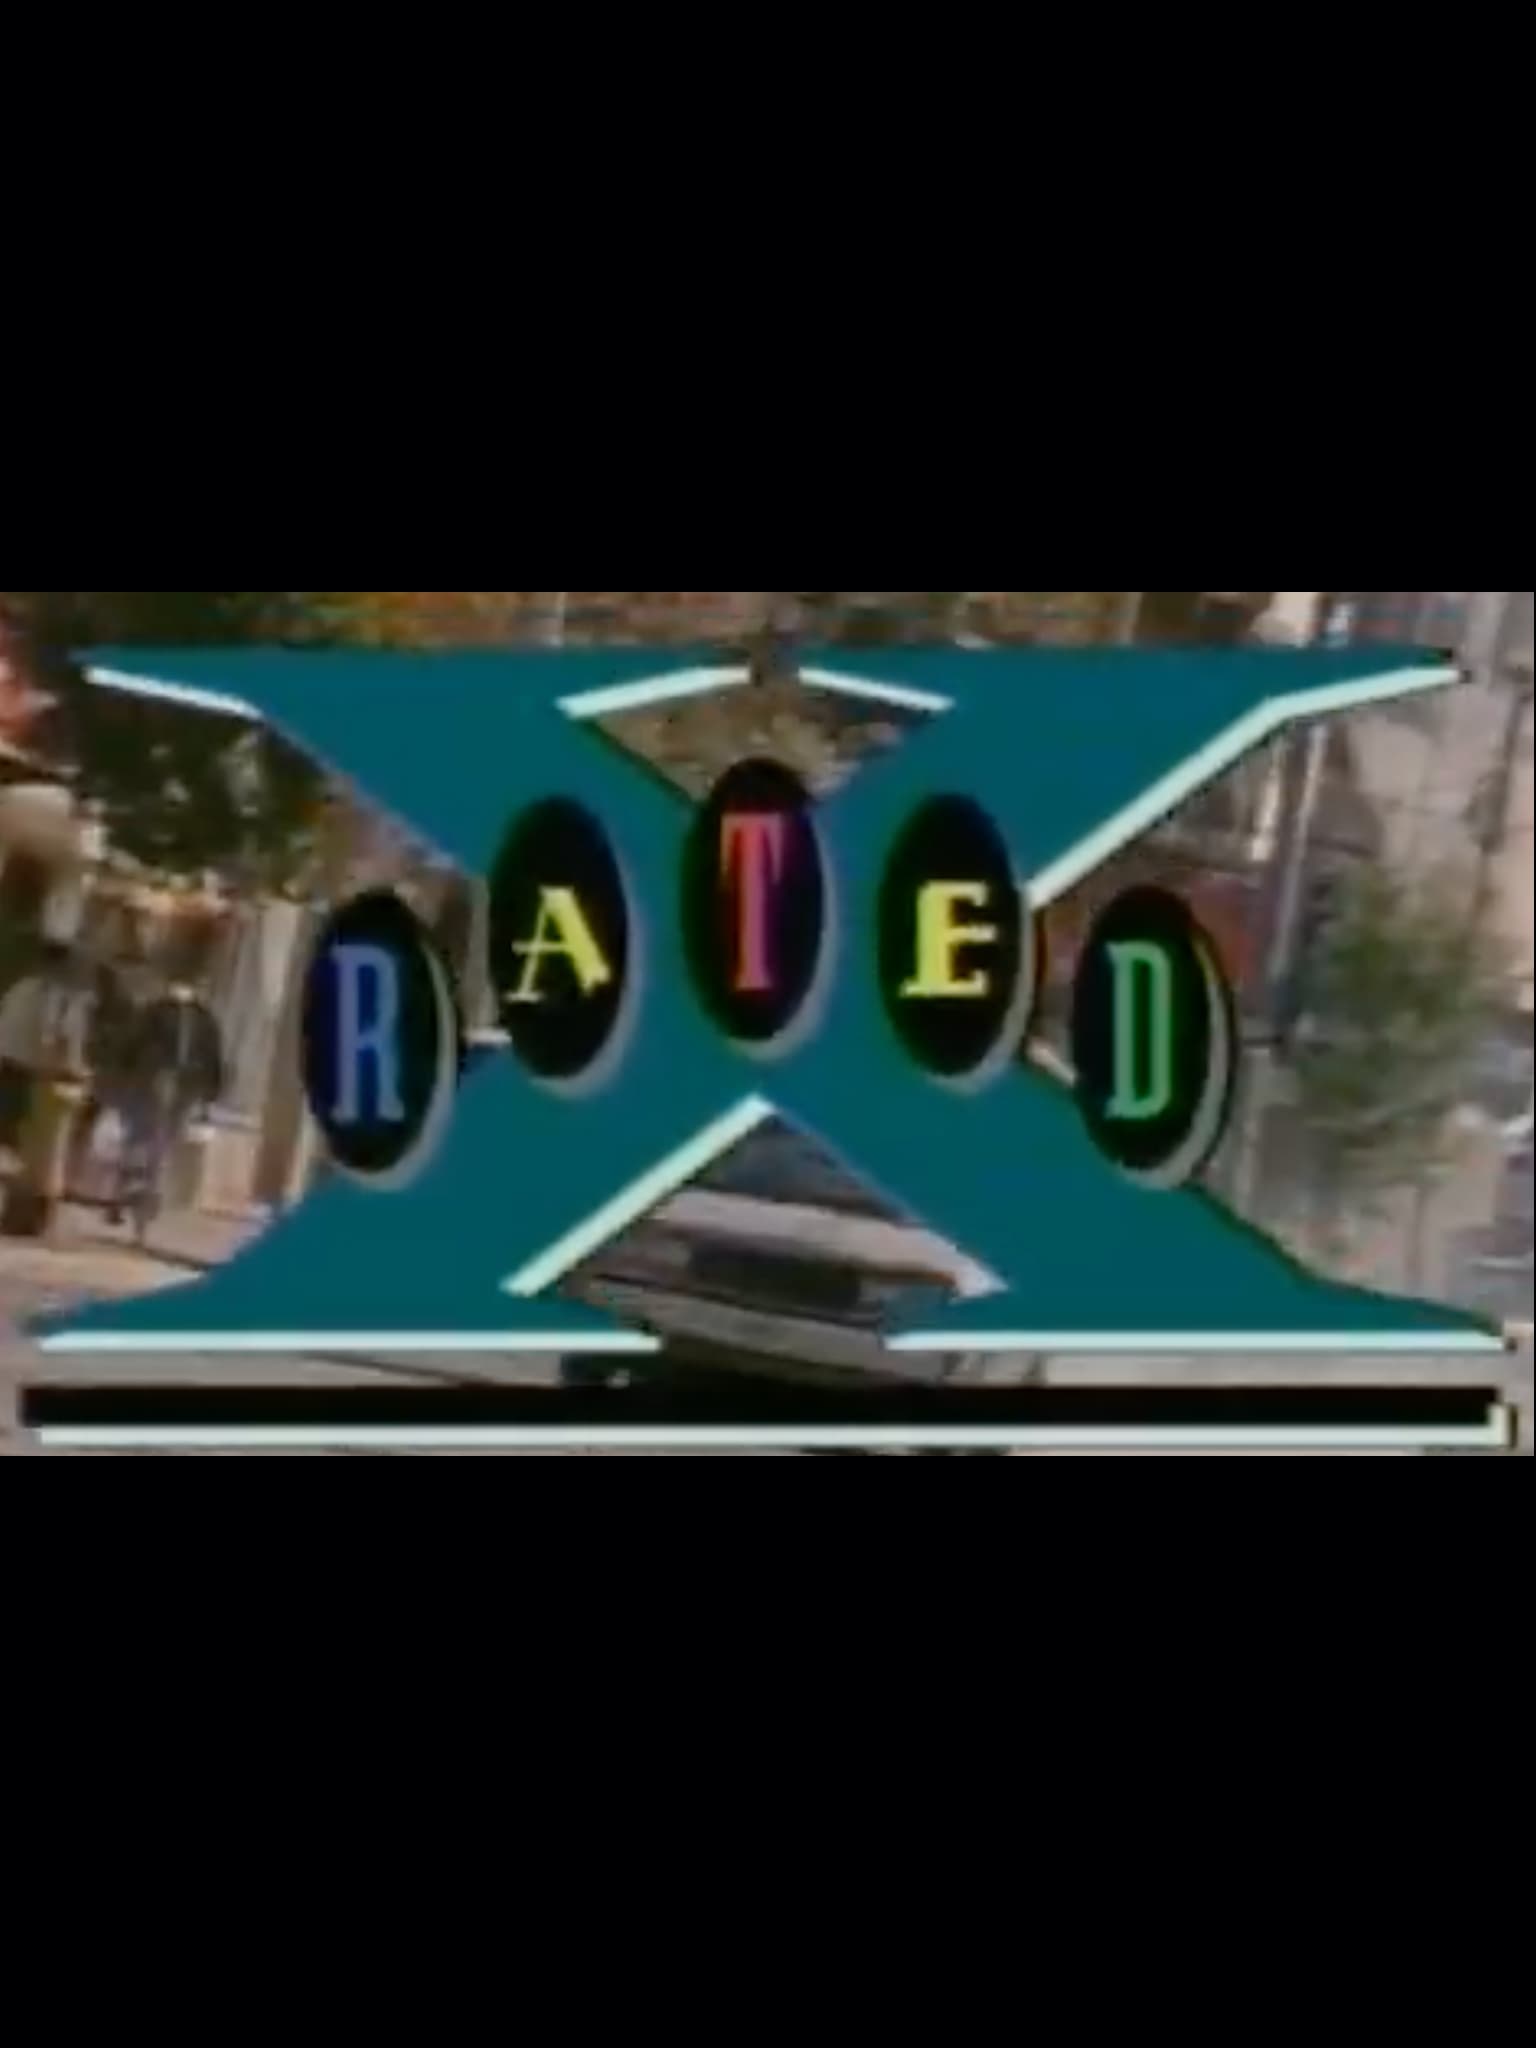 X-Rated (1994)